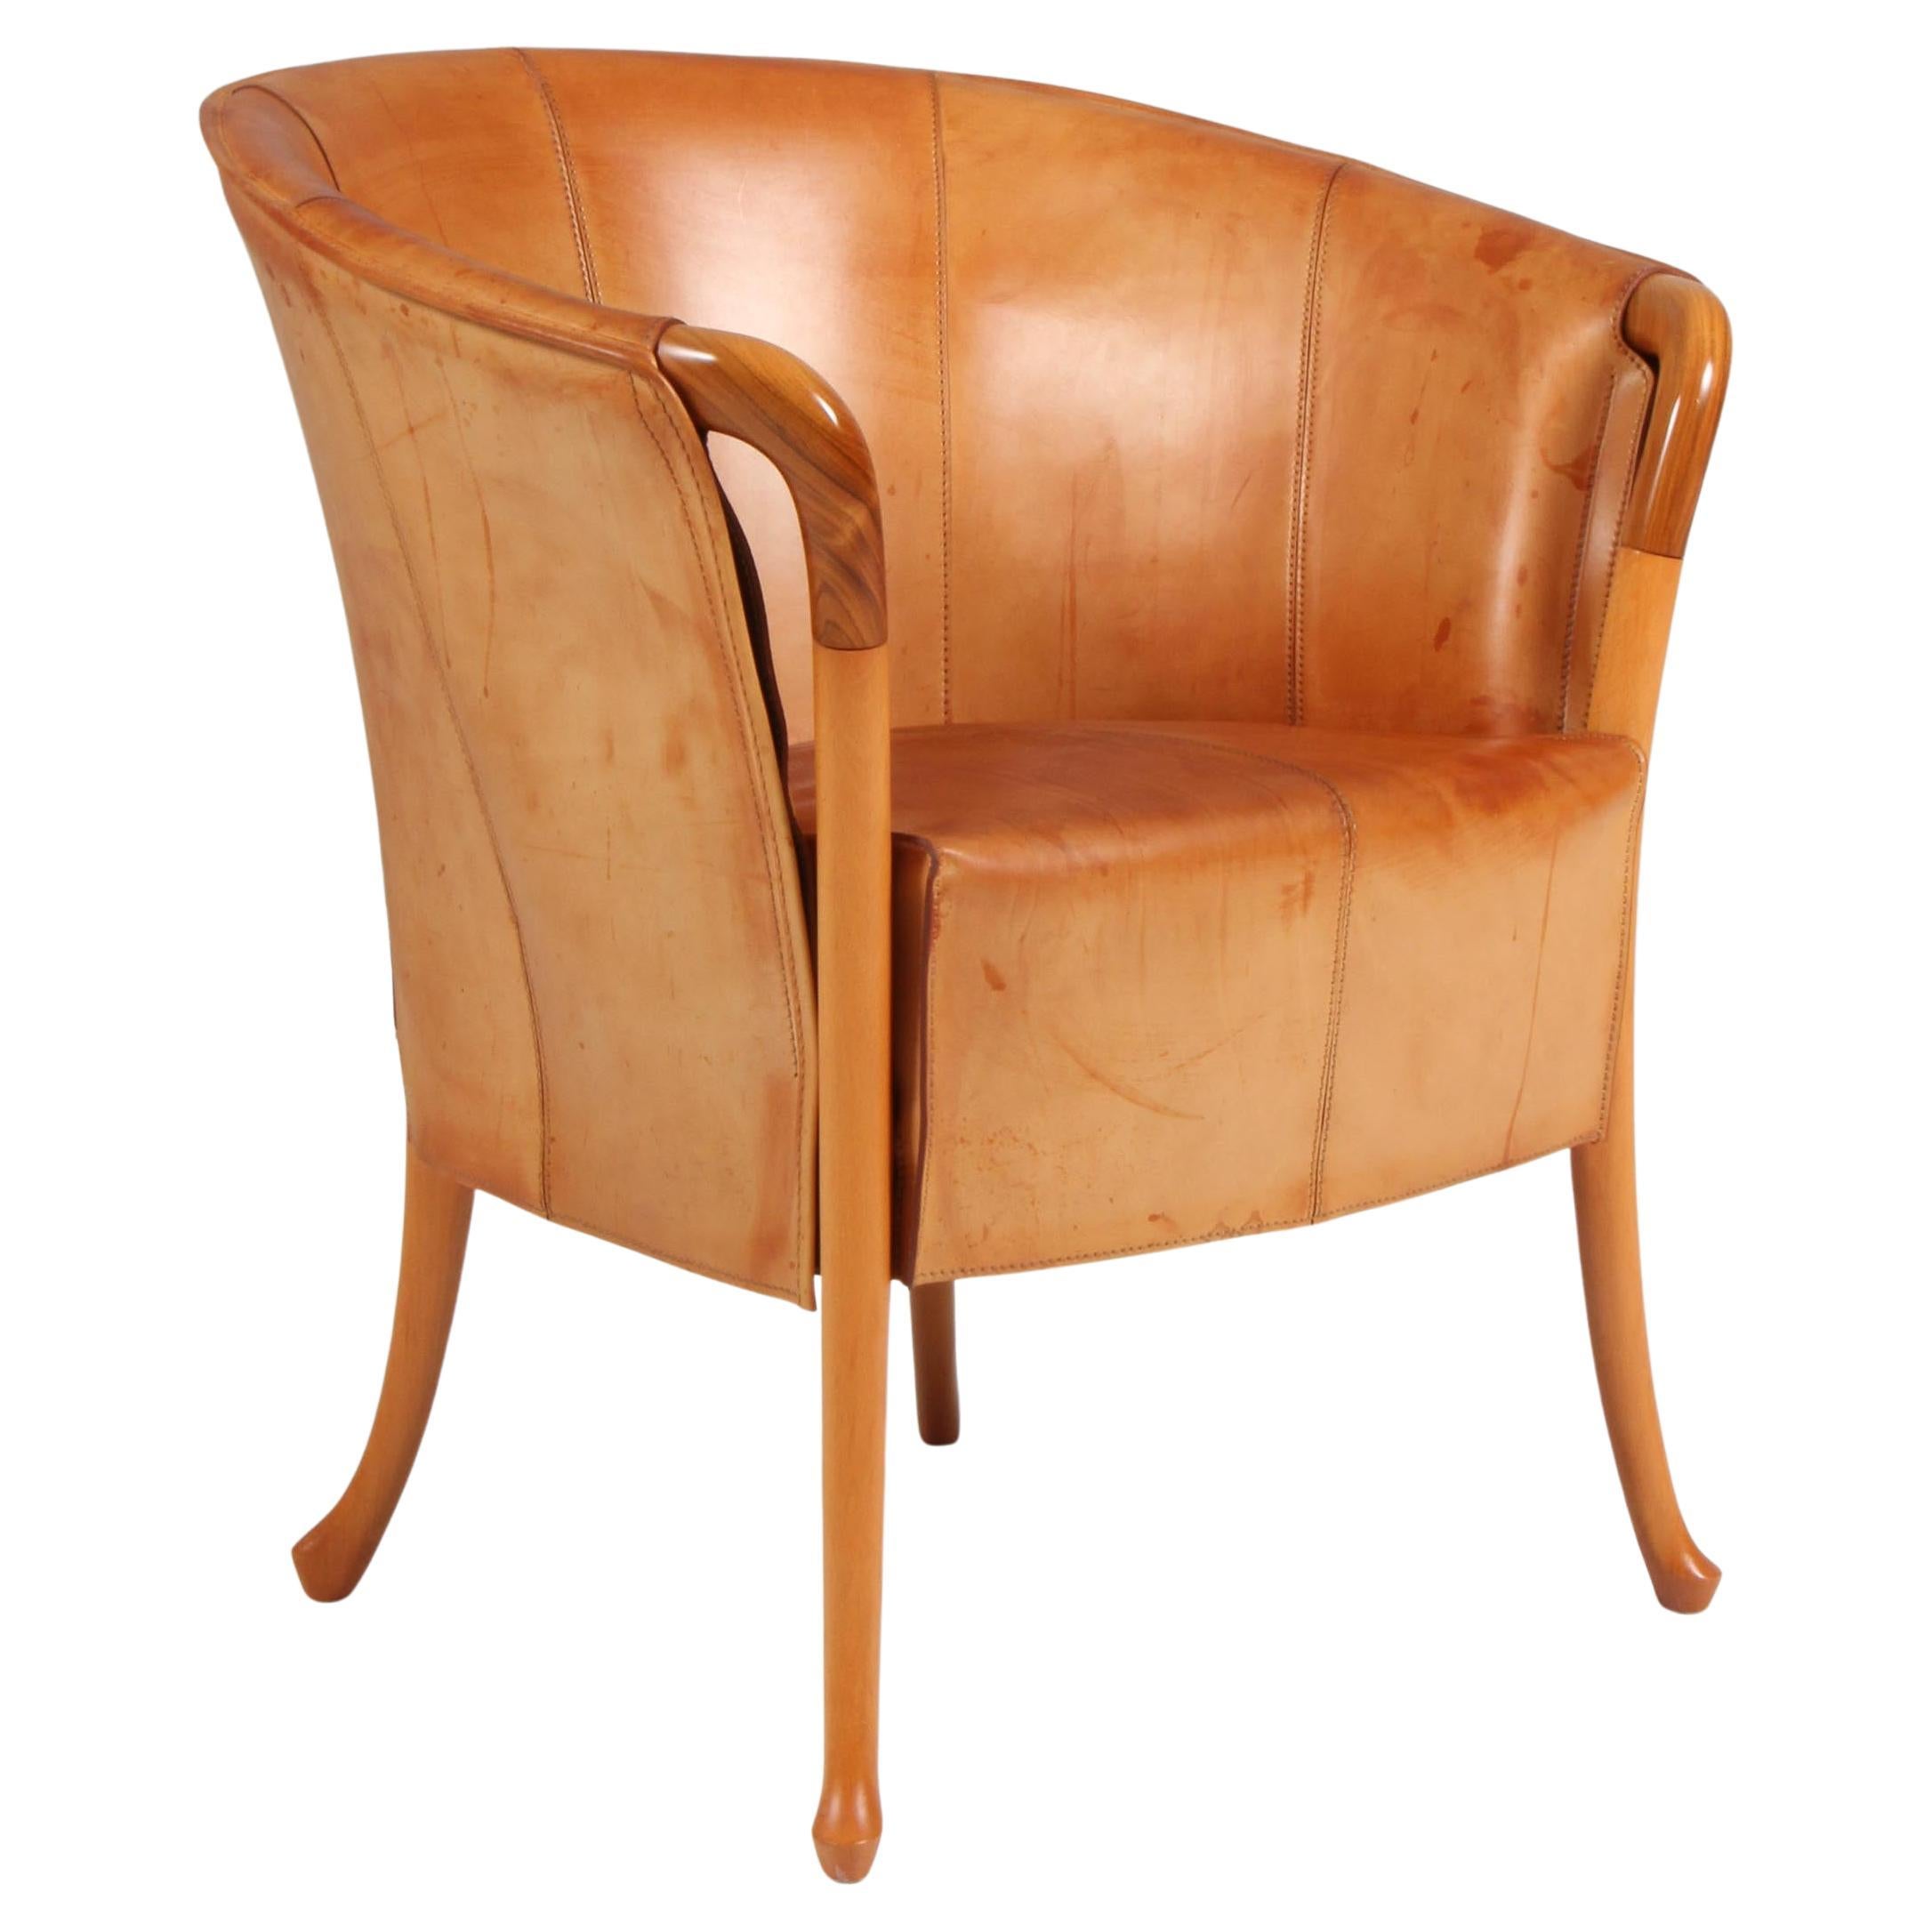 Umberto Asnago for Giorgetti lounge chair in saddle leather